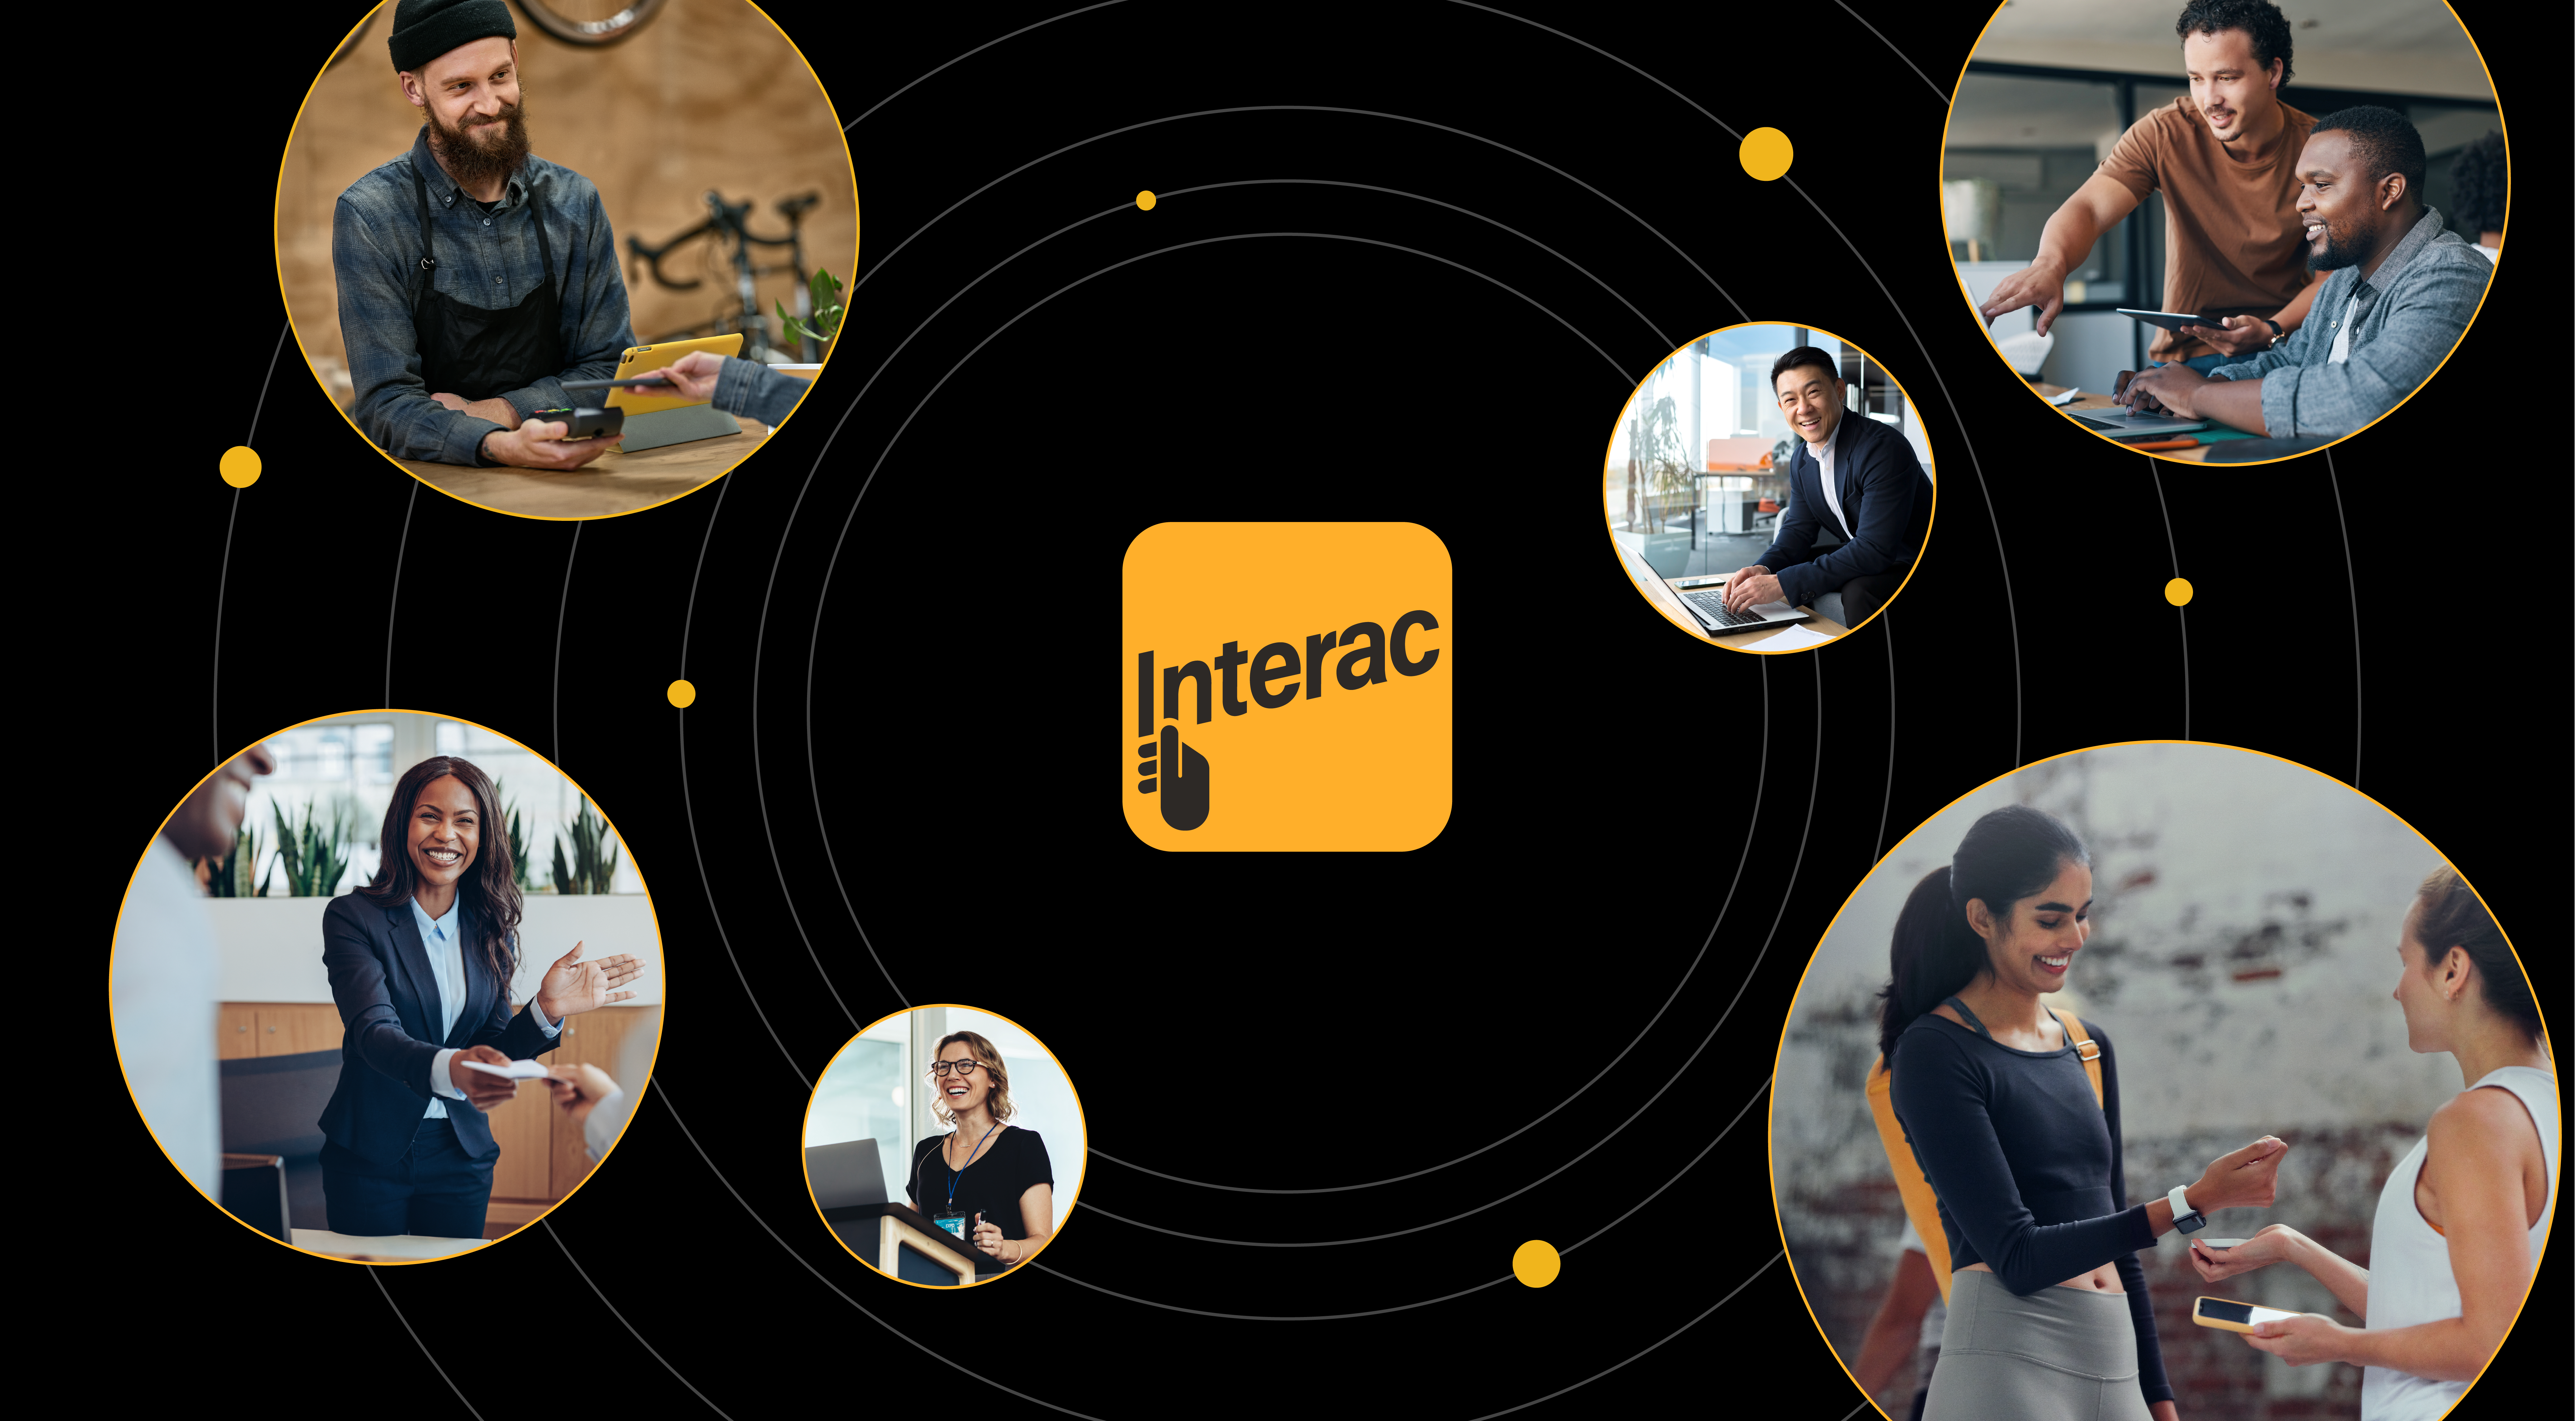 Who are we? Learn how Interac powers daily transactions for Canadians